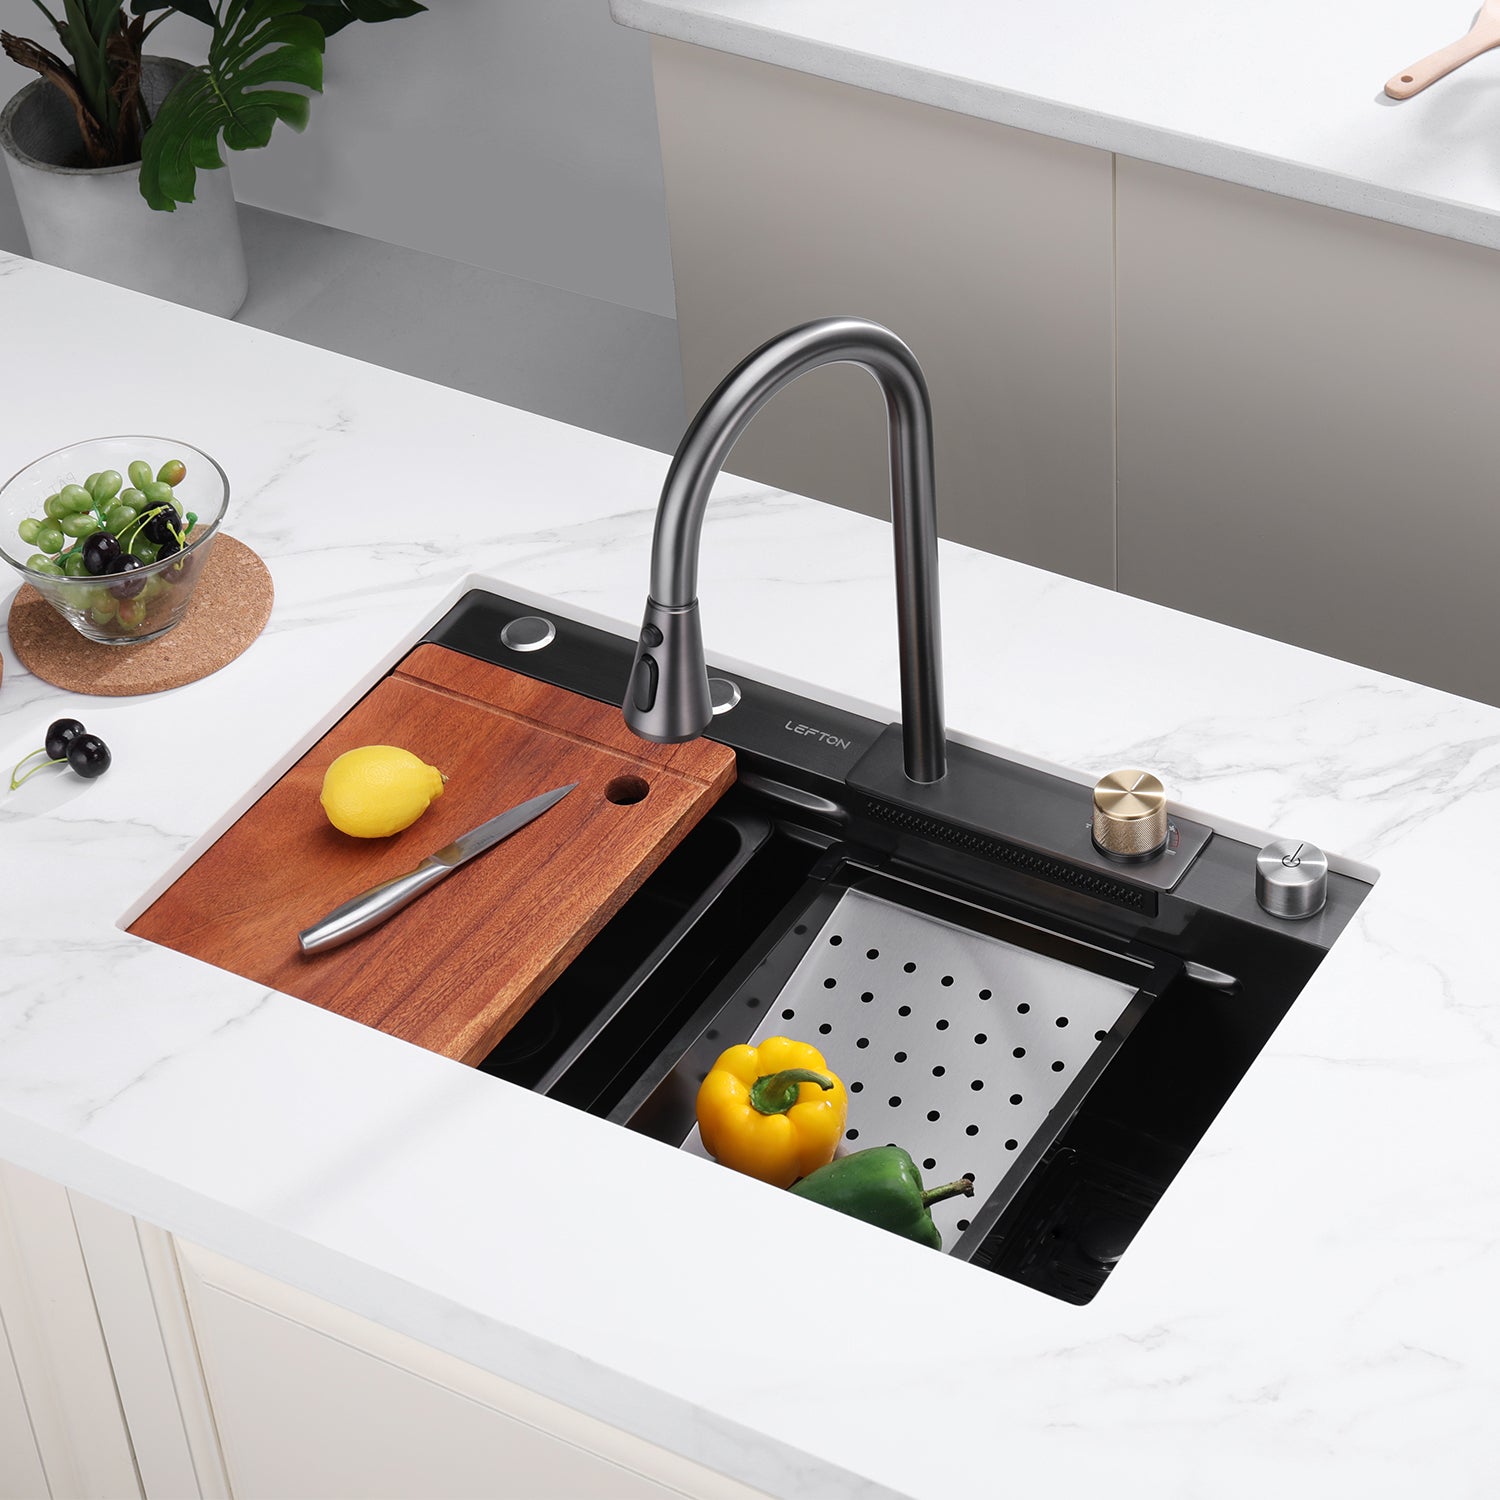 Lefton Stainless Steel Workstation Kitchen Sink Set with Waterfall Faucet